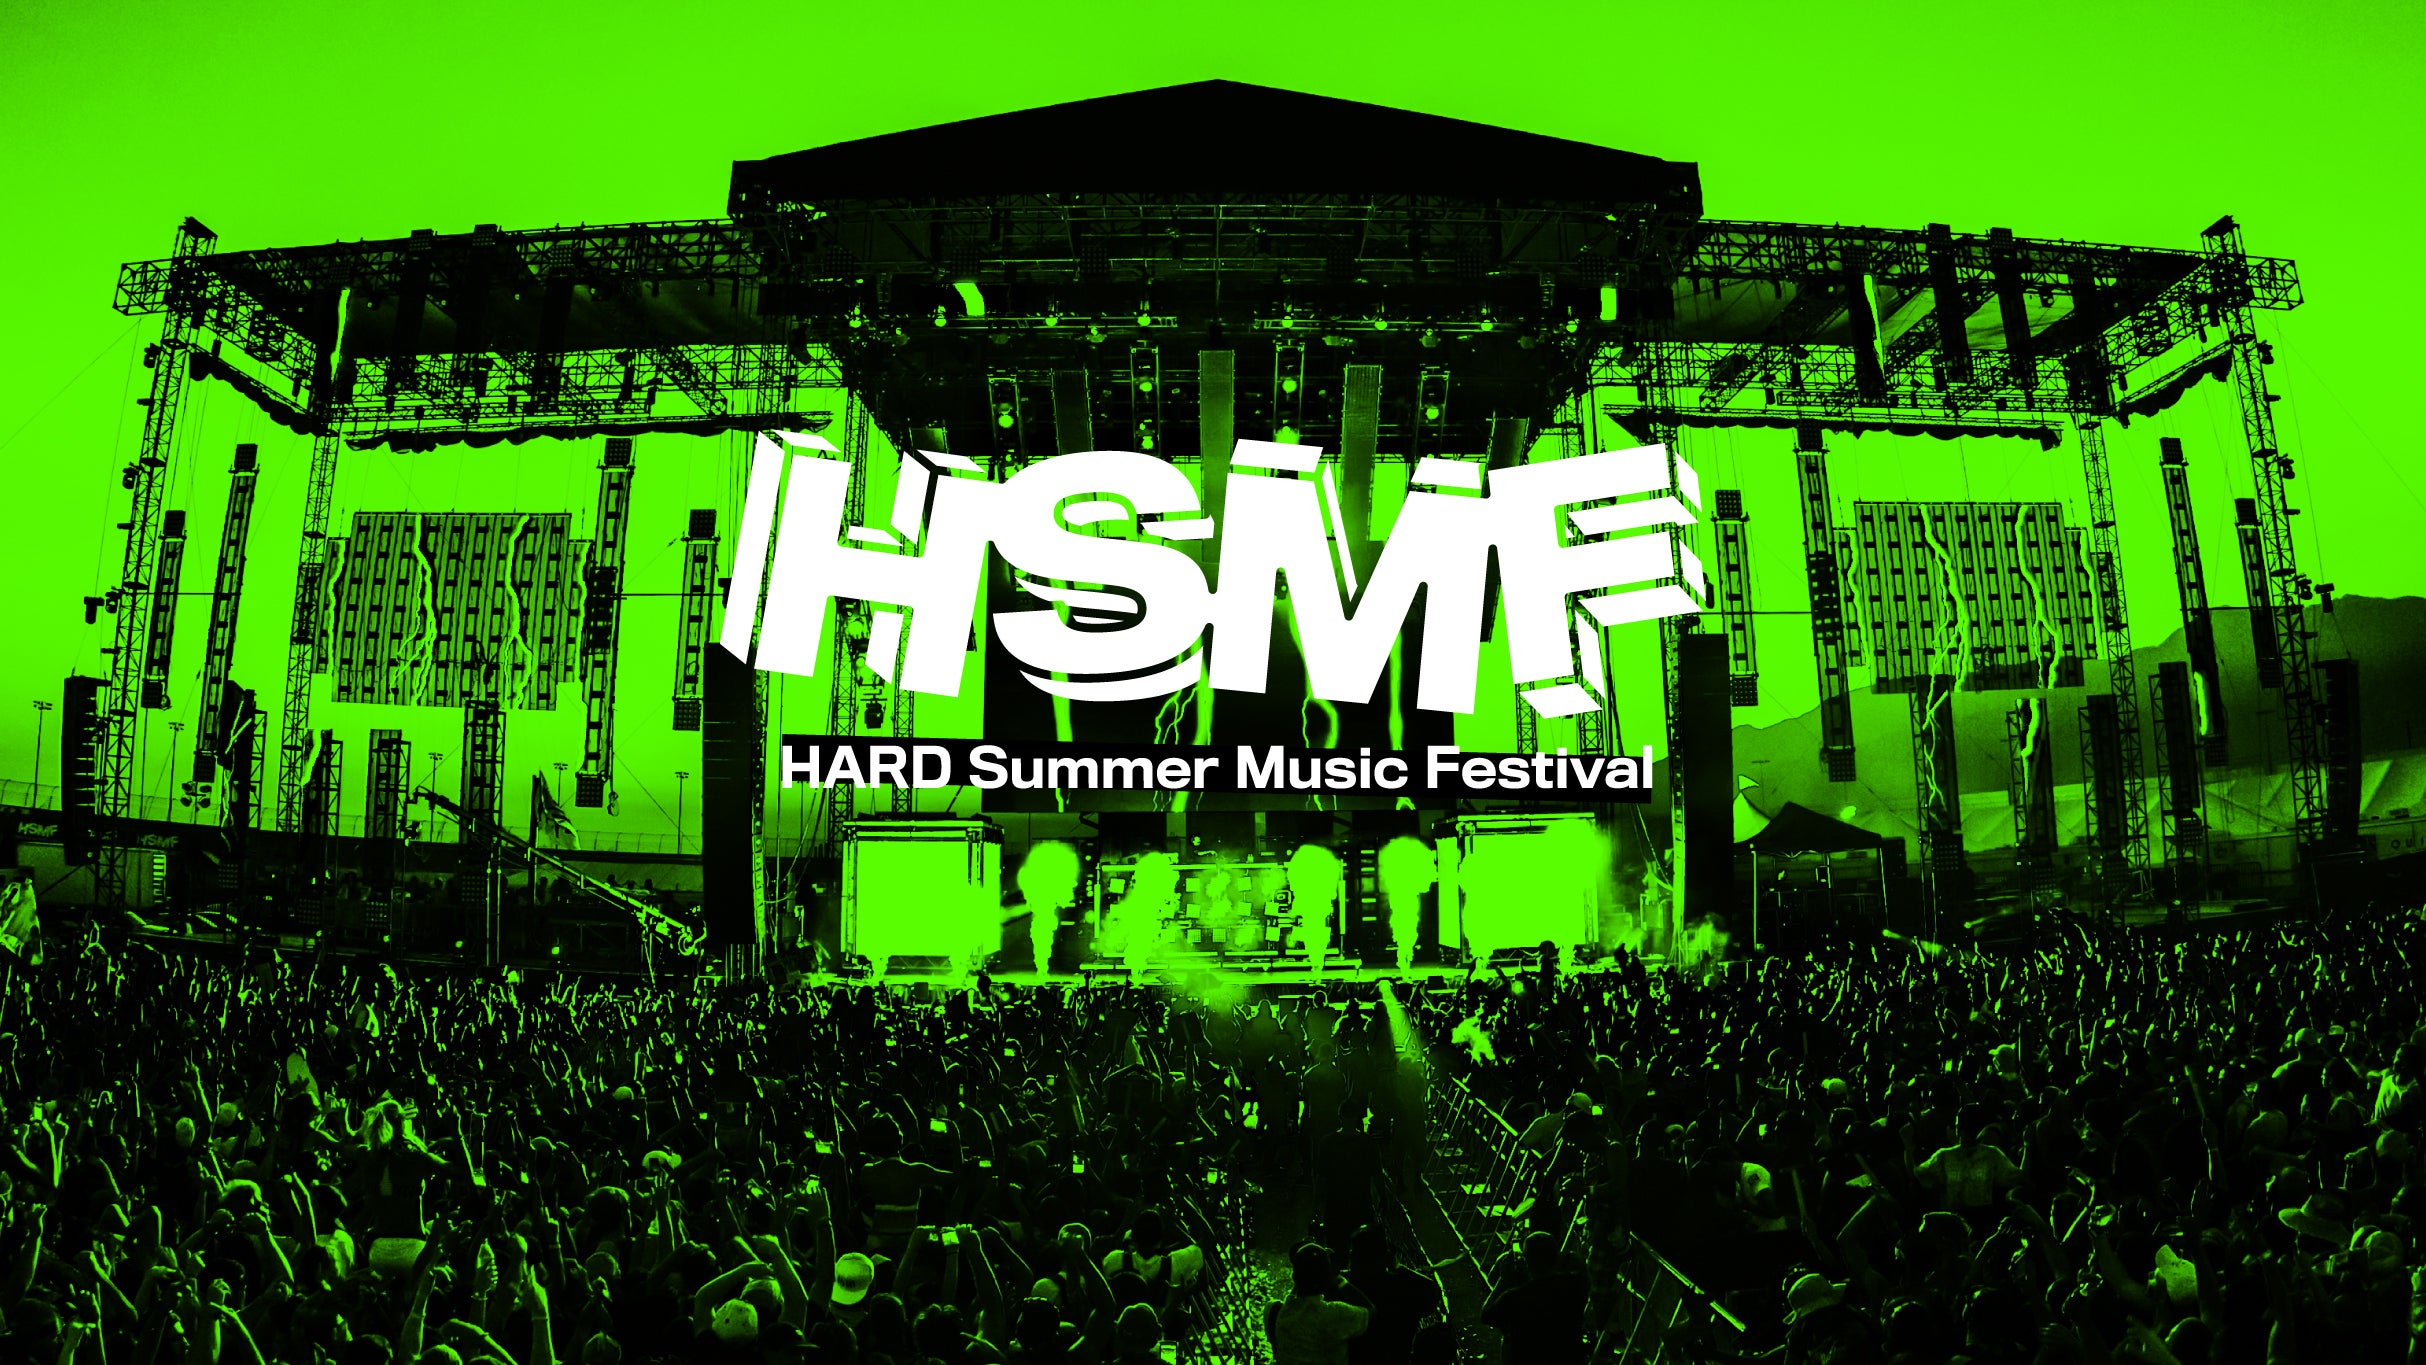 HARD Summer Music Festival at Hollywood Park Grounds